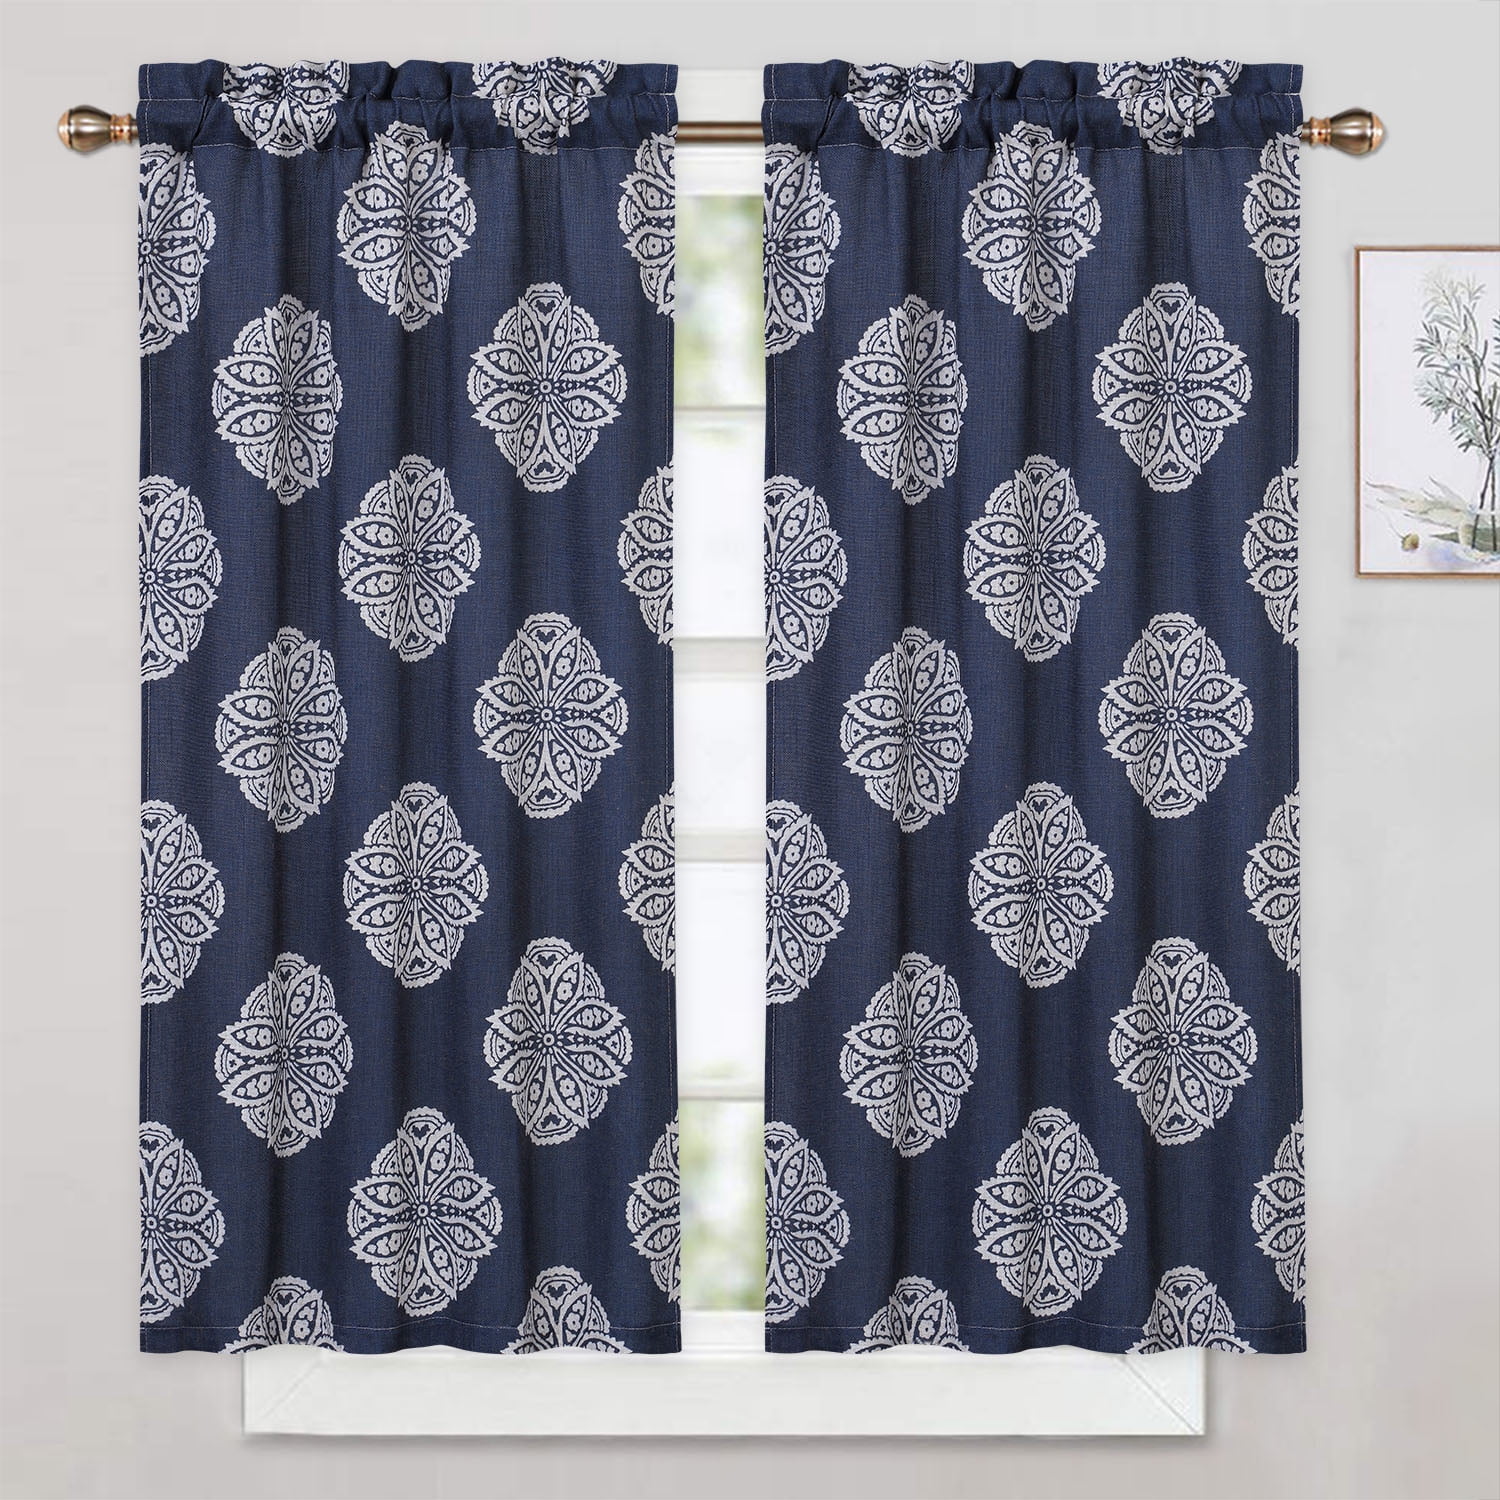 CAROMIO Tier Curtains 30 Inch Length Floral Medallion Damask Print Linen Blended Short Tier Curtains for Kitchen Cafe Small Half Window Curtains for Bathroom Dark Navy